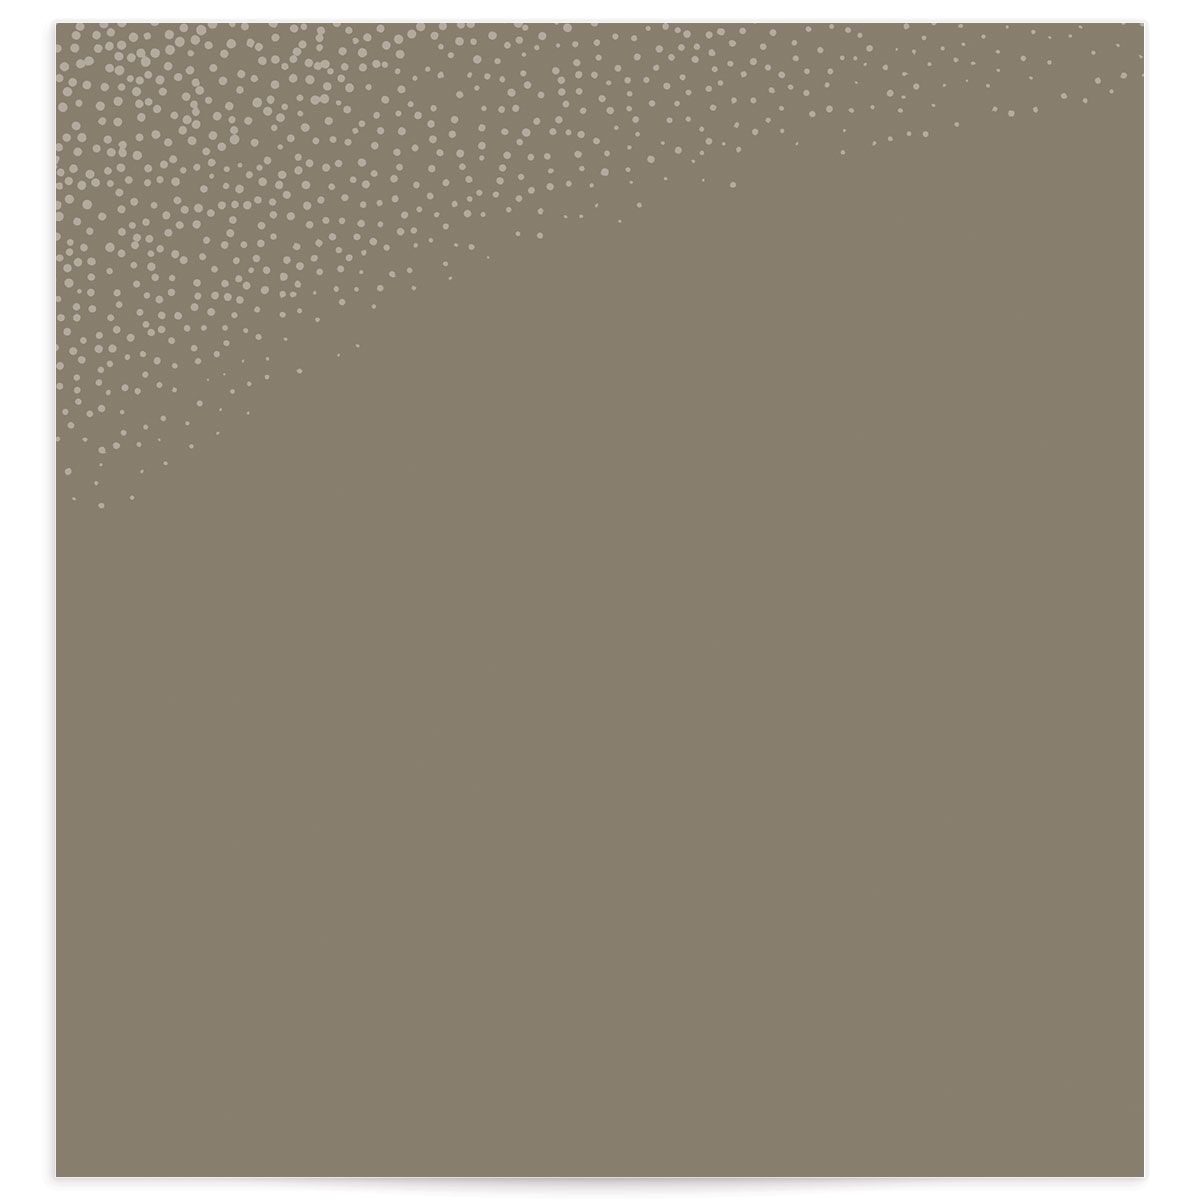 Sweeping Sparkles Standard Envelope Liners front in brown